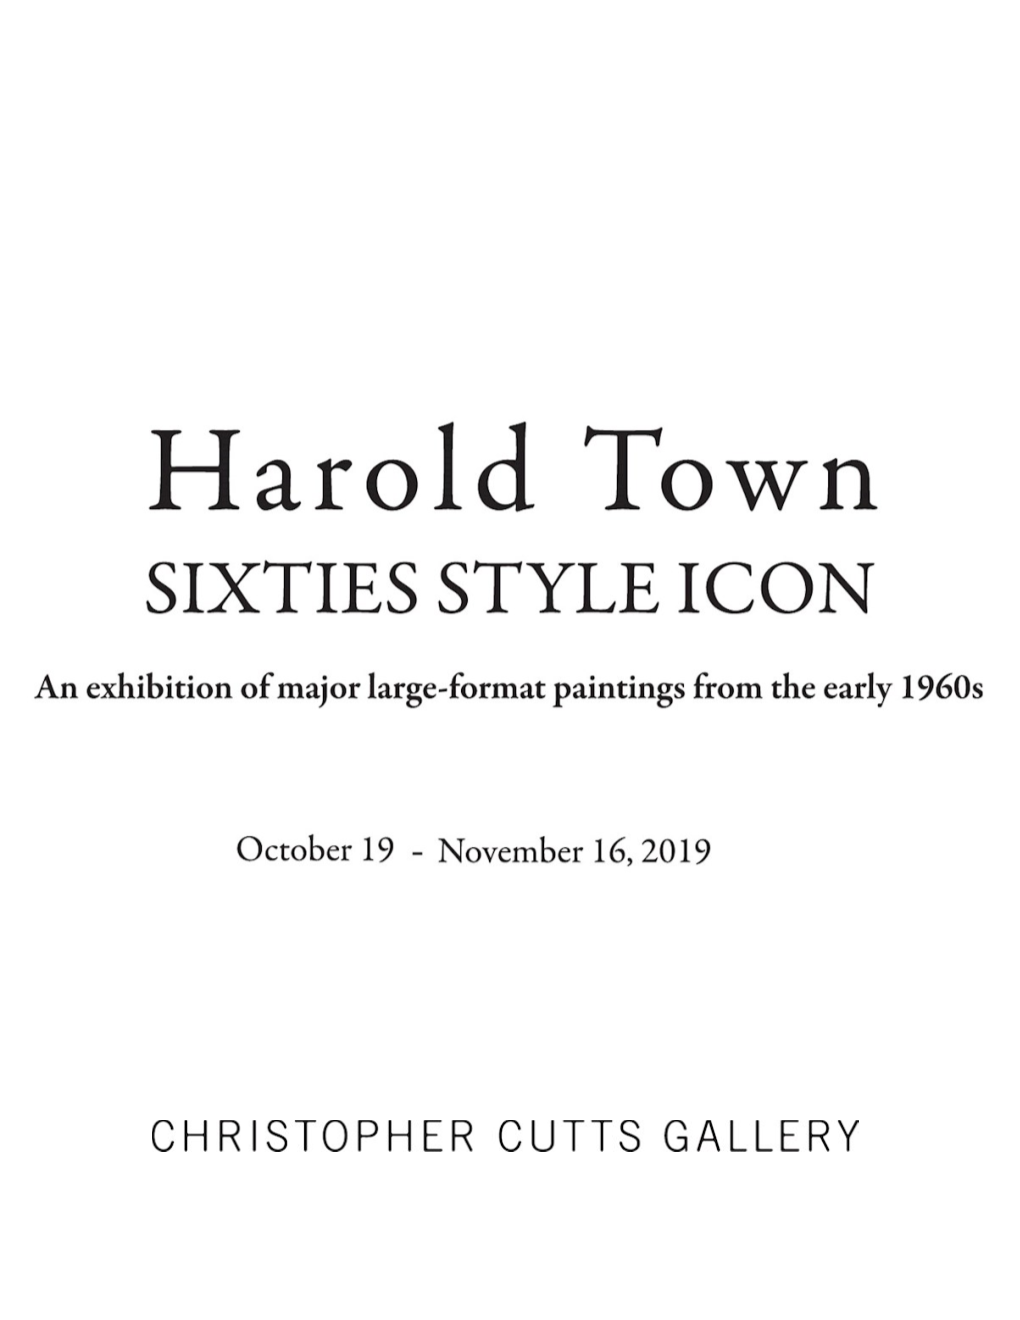 Christopher-Cutts-Gallery-Catalog-1.Pdf